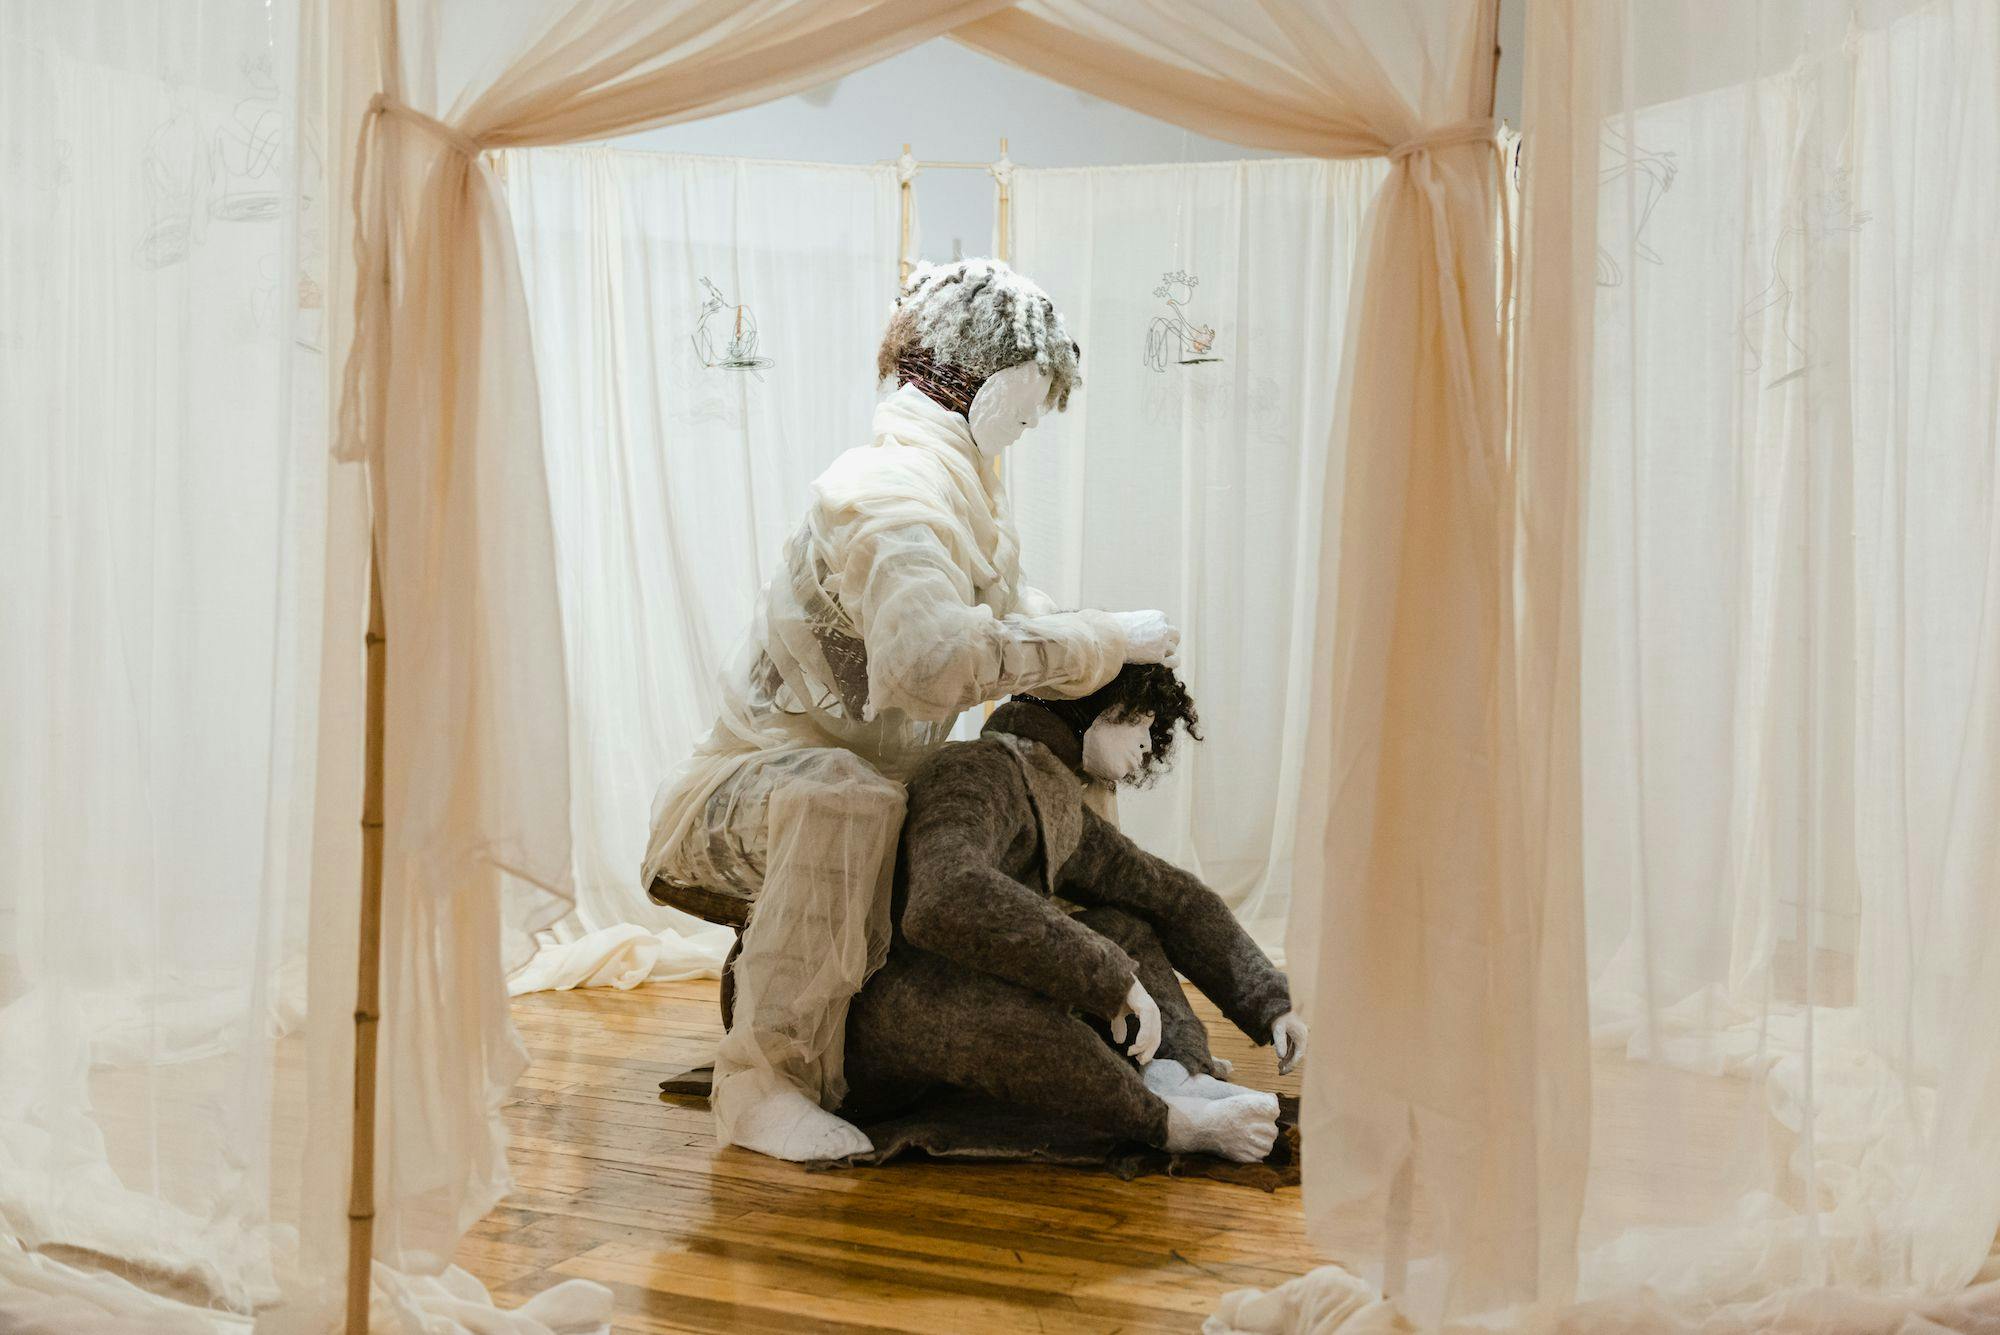 Two masked people crouch in a room covered with sheer white curtains. One figure crouches over the other with their hands in the other person’s hair. 